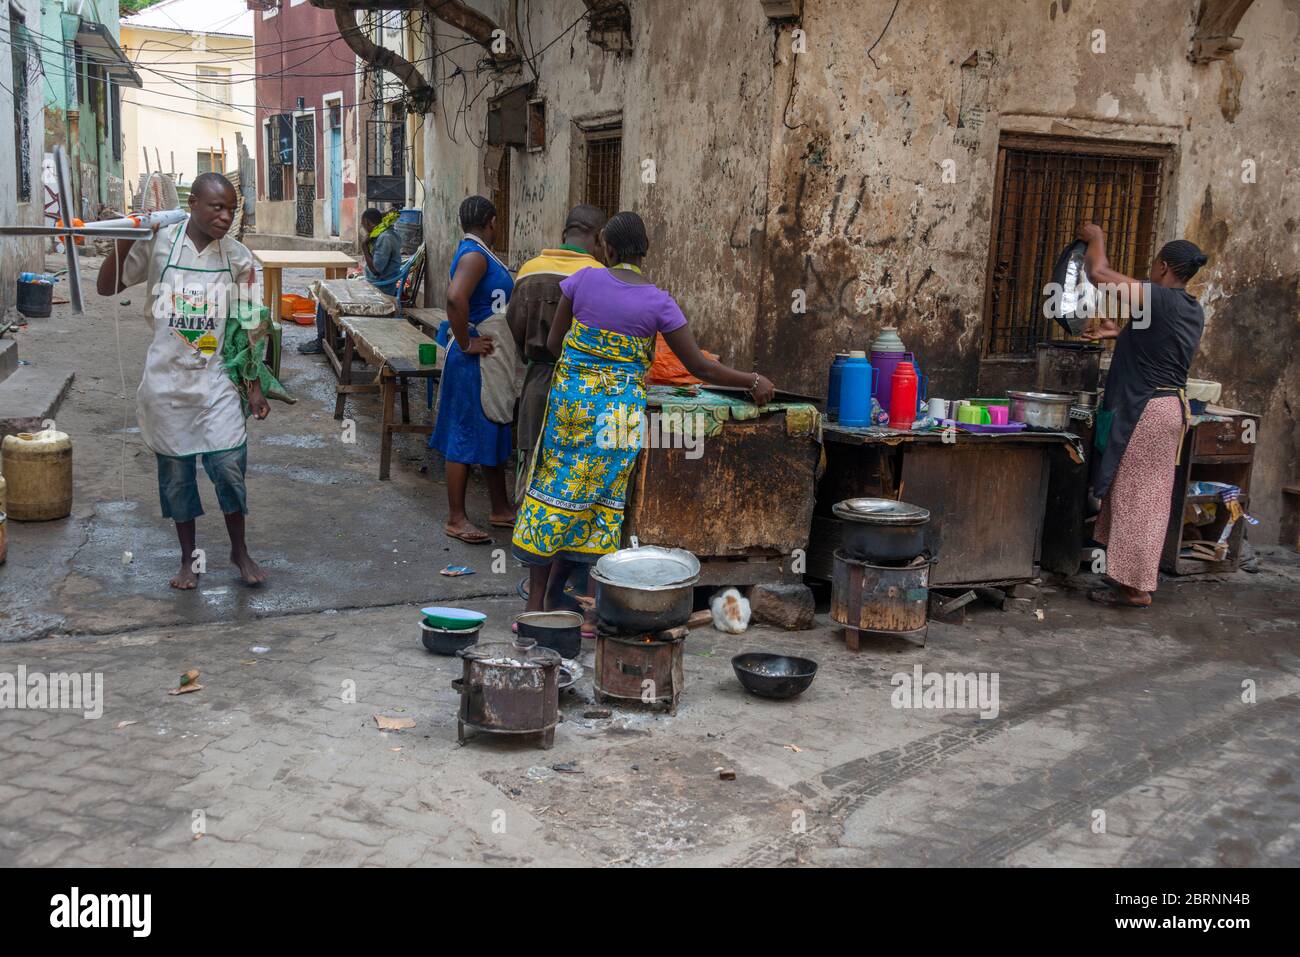 Street scene in Old Town Mombasa with women preparing food for sale Stock Photo